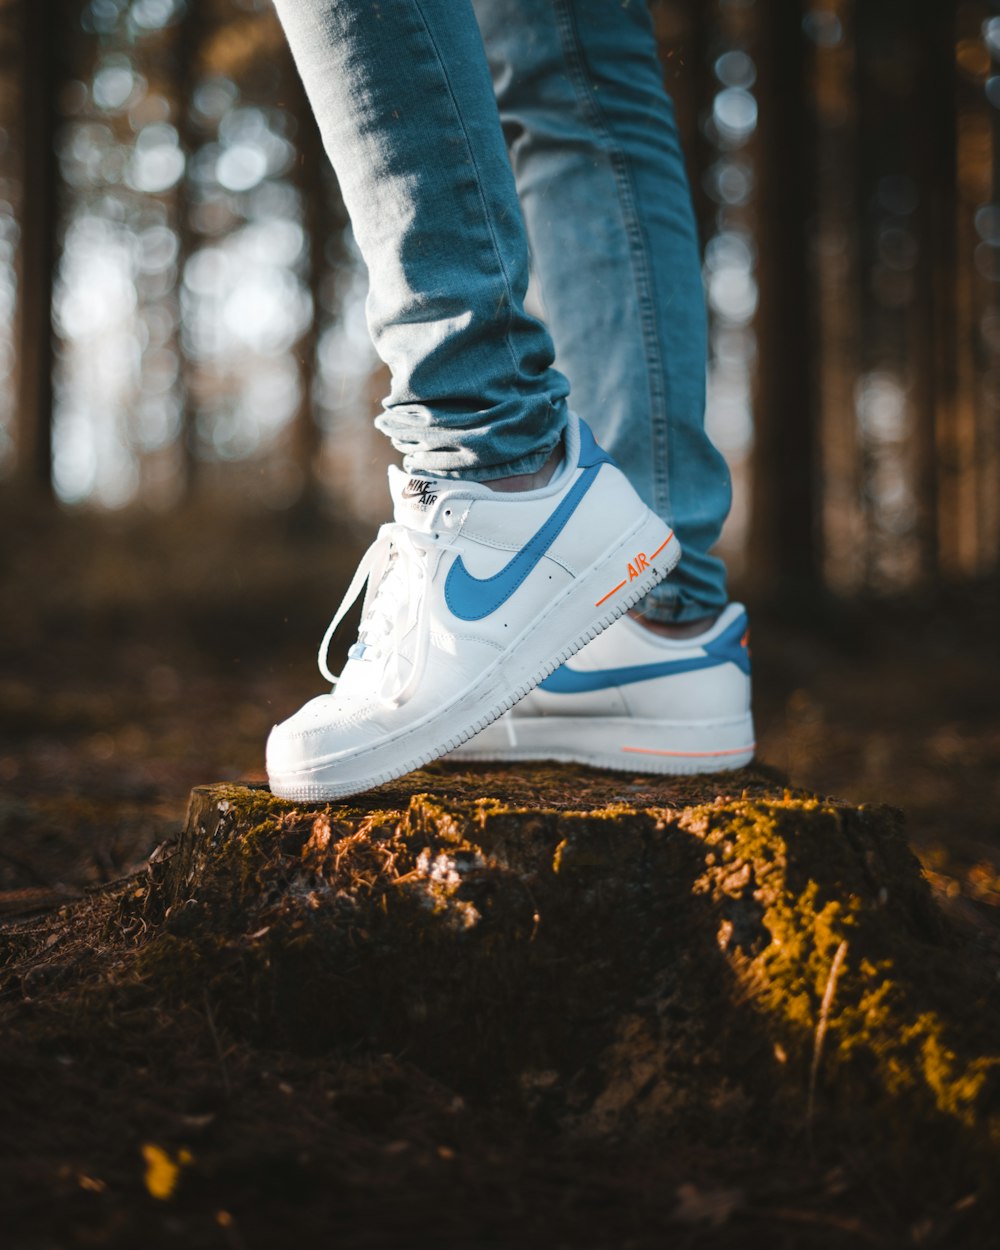 person wearing blue denim jeans and white Nike Air Max shoes standing on  tree stomp photo – Free Image on Unsplash